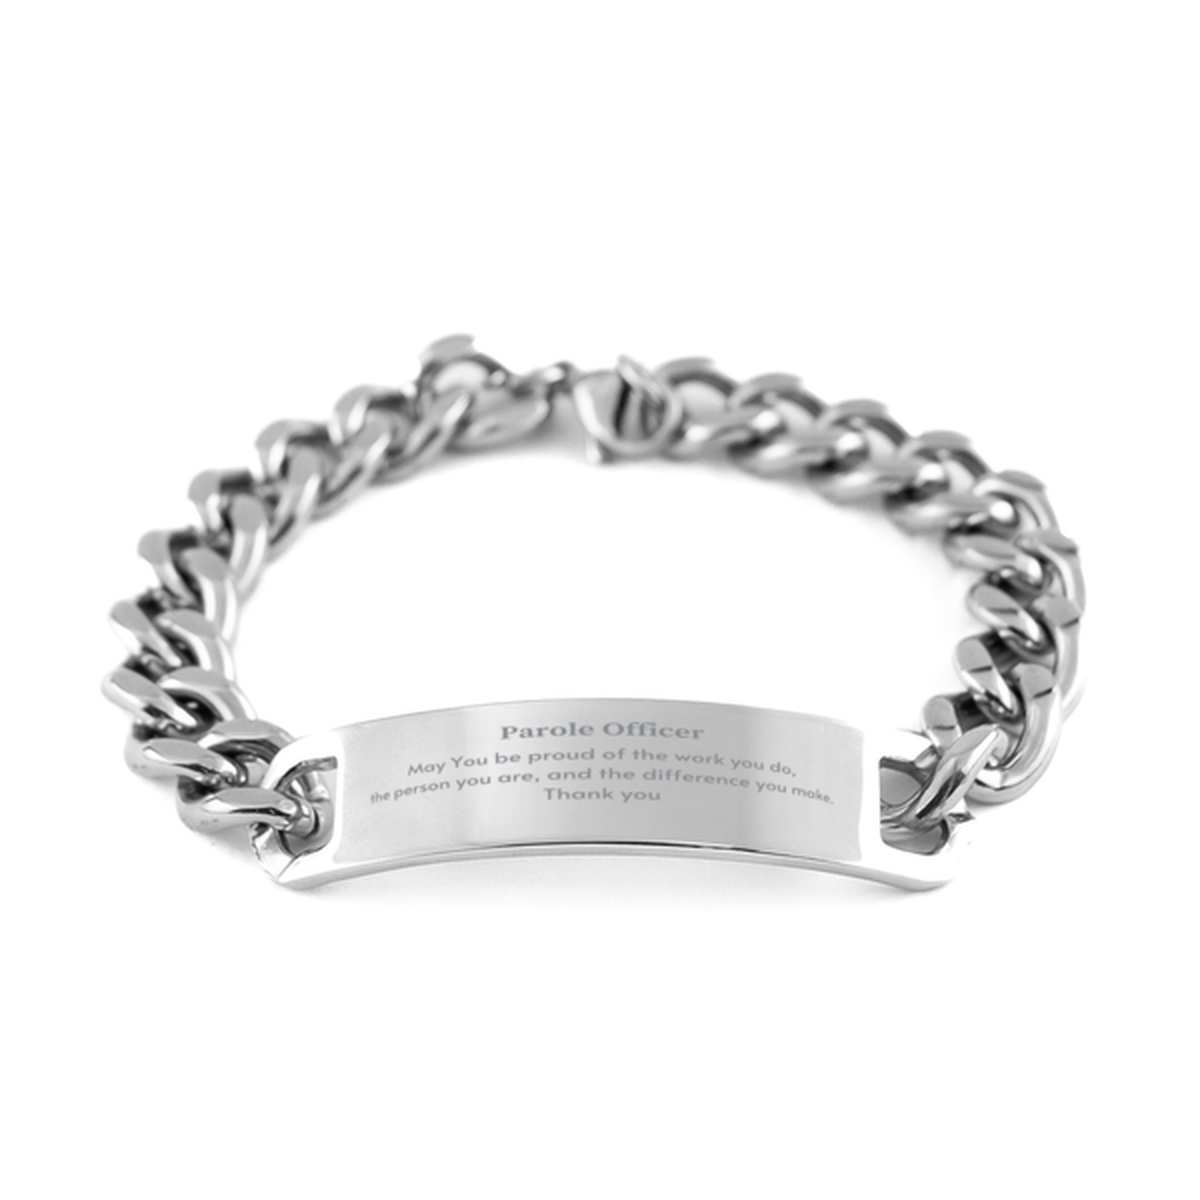 Heartwarming Cuban Chain Stainless Steel Bracelet Retirement Coworkers Gifts for Parole Officer, Parole Officer May You be proud of the work you do, the person you are Gifts for Boss Men Women Friends